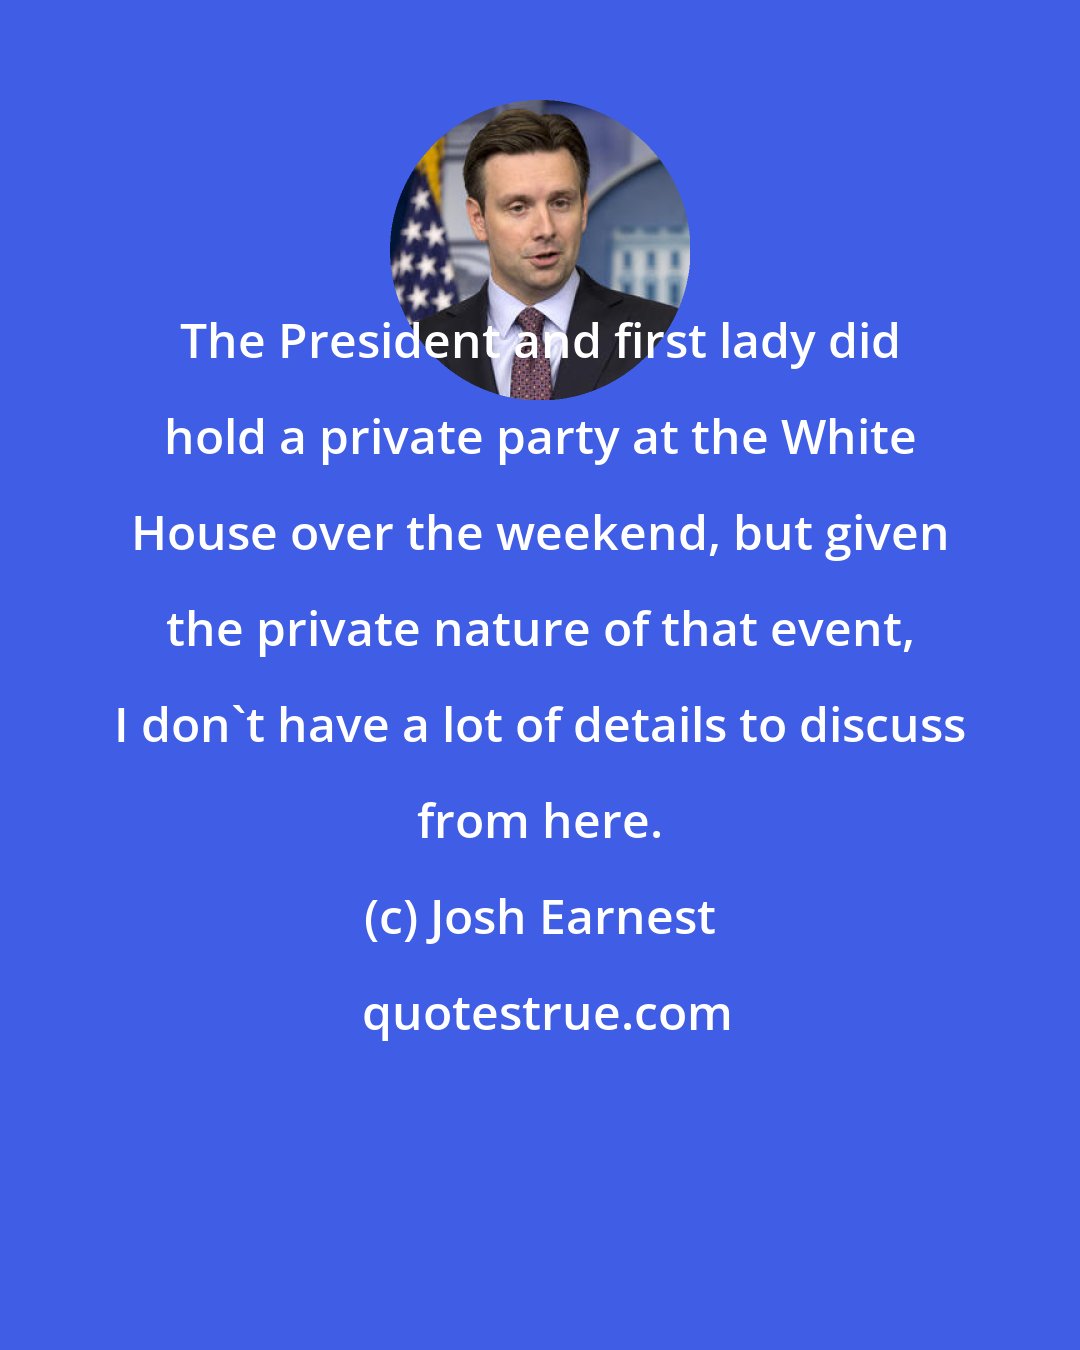 Josh Earnest: The President and first lady did hold a private party at the White House over the weekend, but given the private nature of that event, I don't have a lot of details to discuss from here.